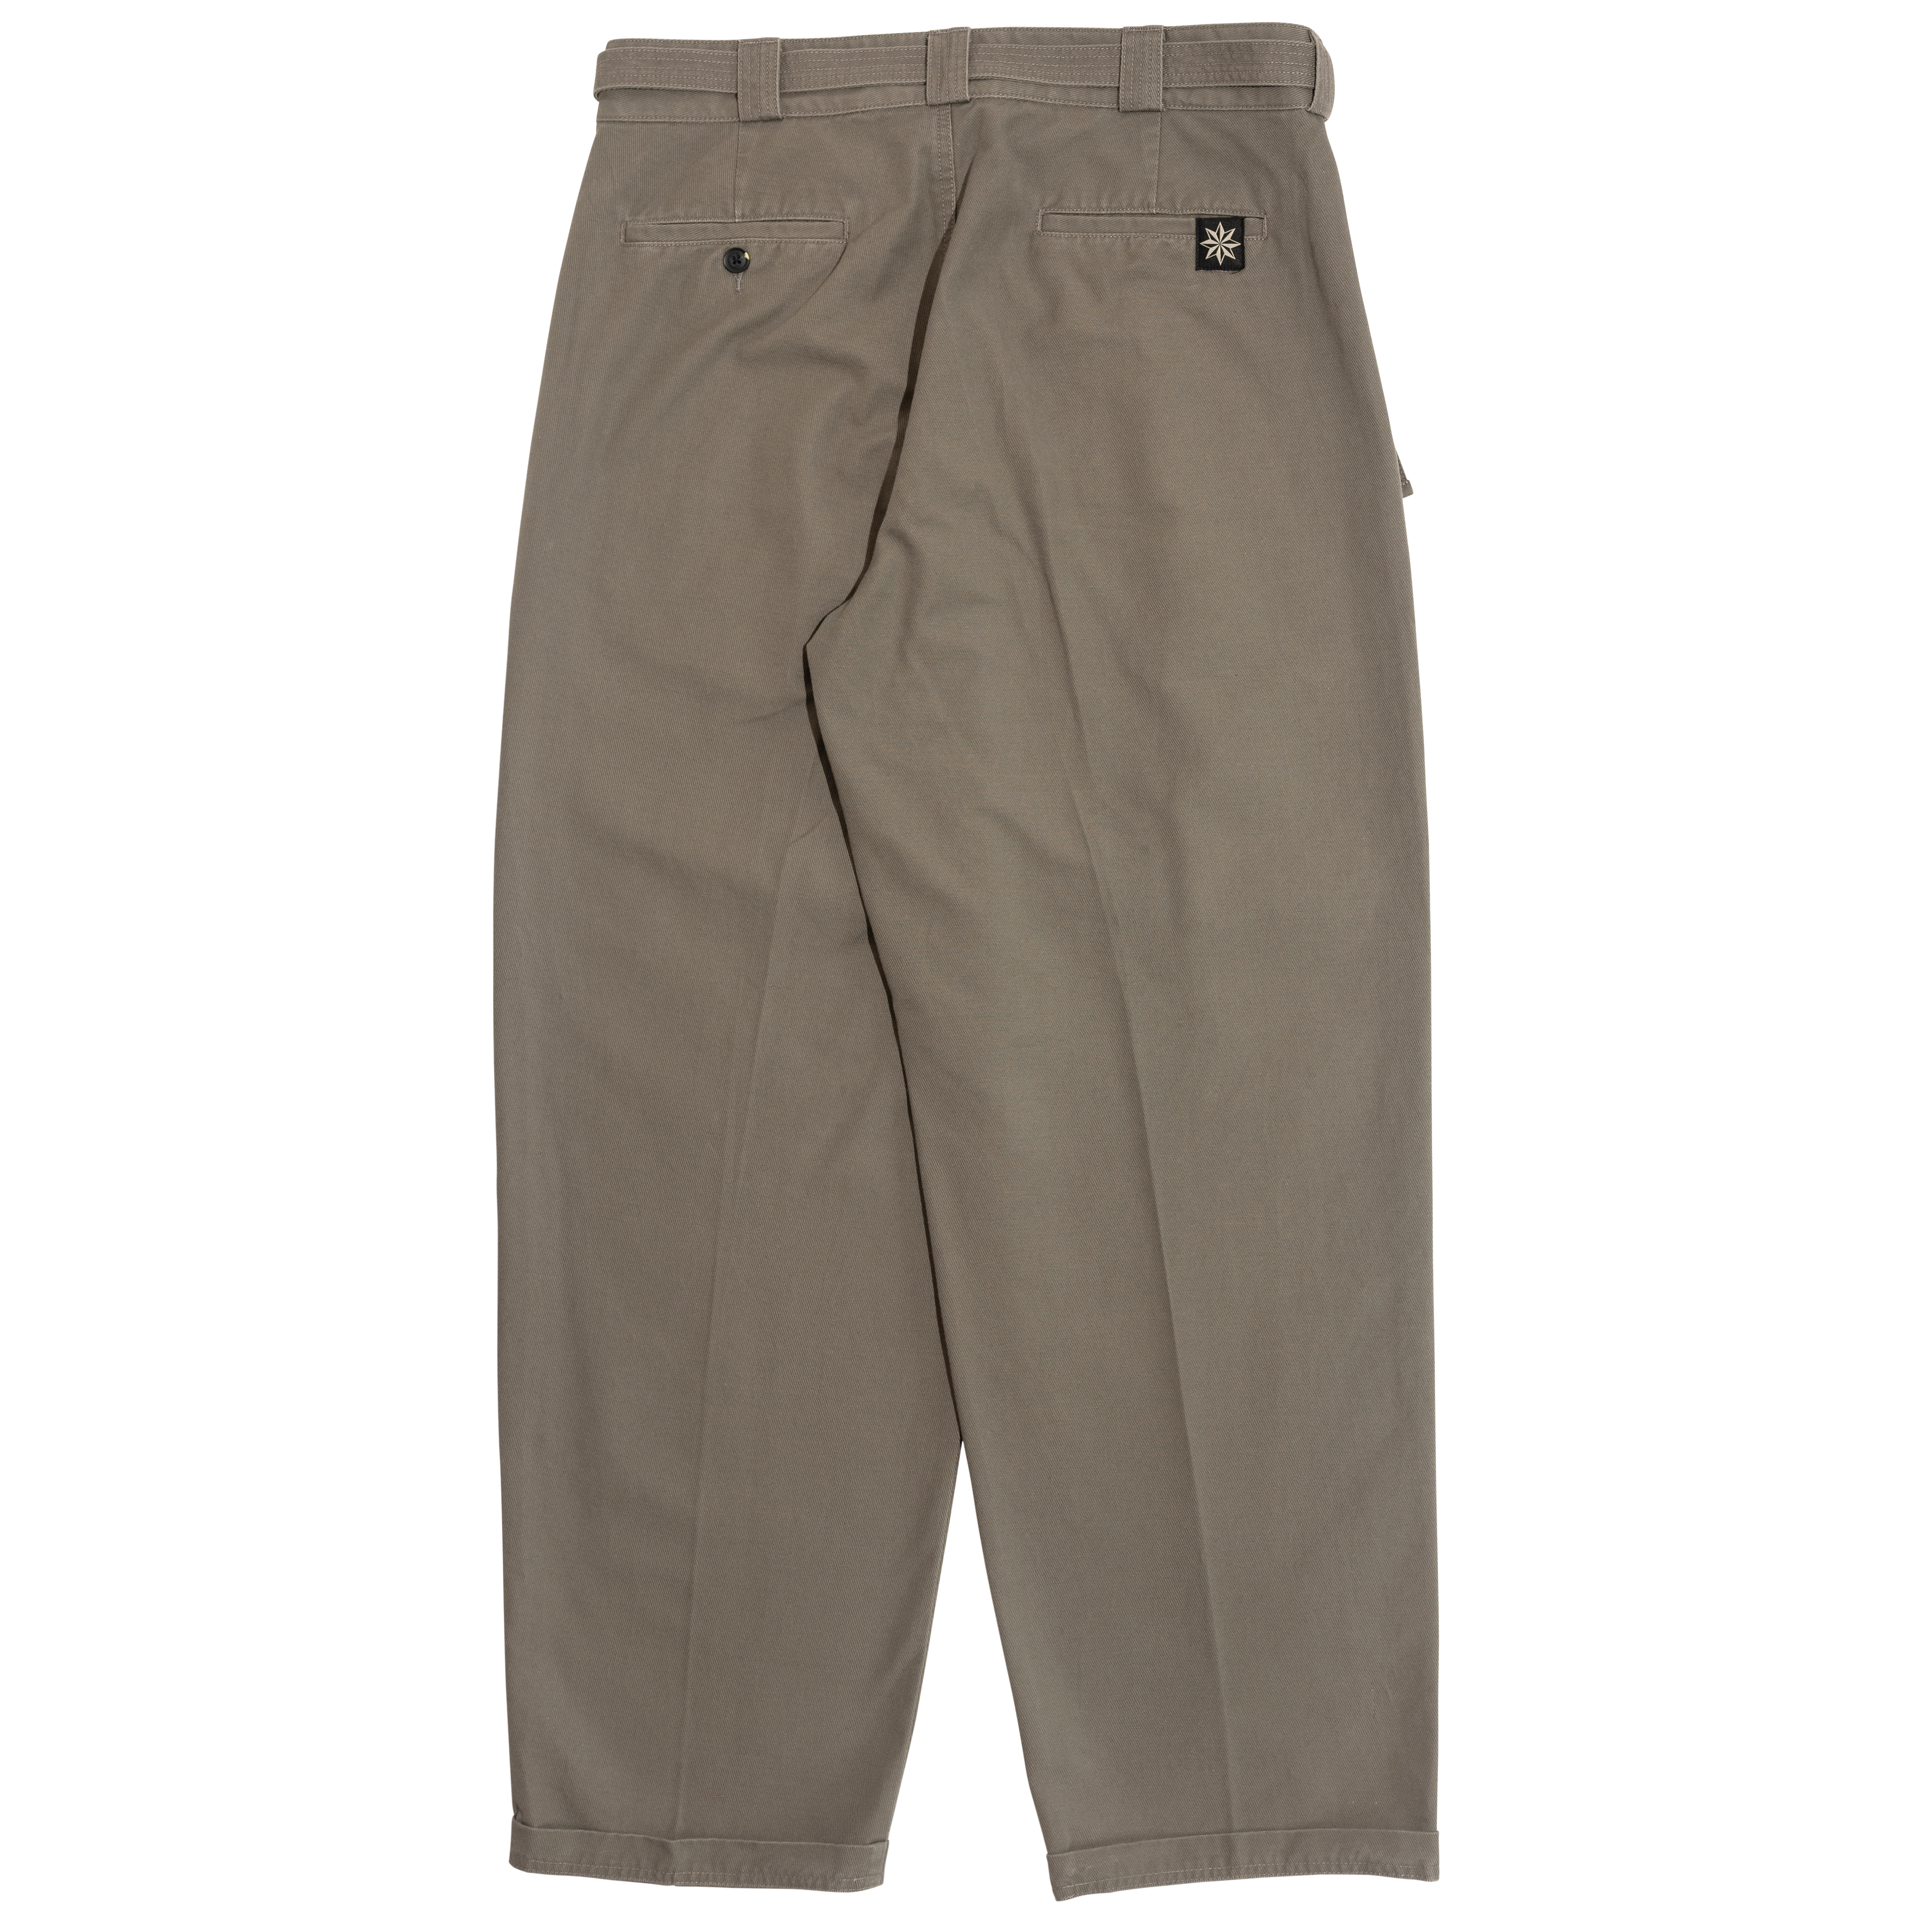 Beach Brains | Pleated Work Pant - Pewter Green